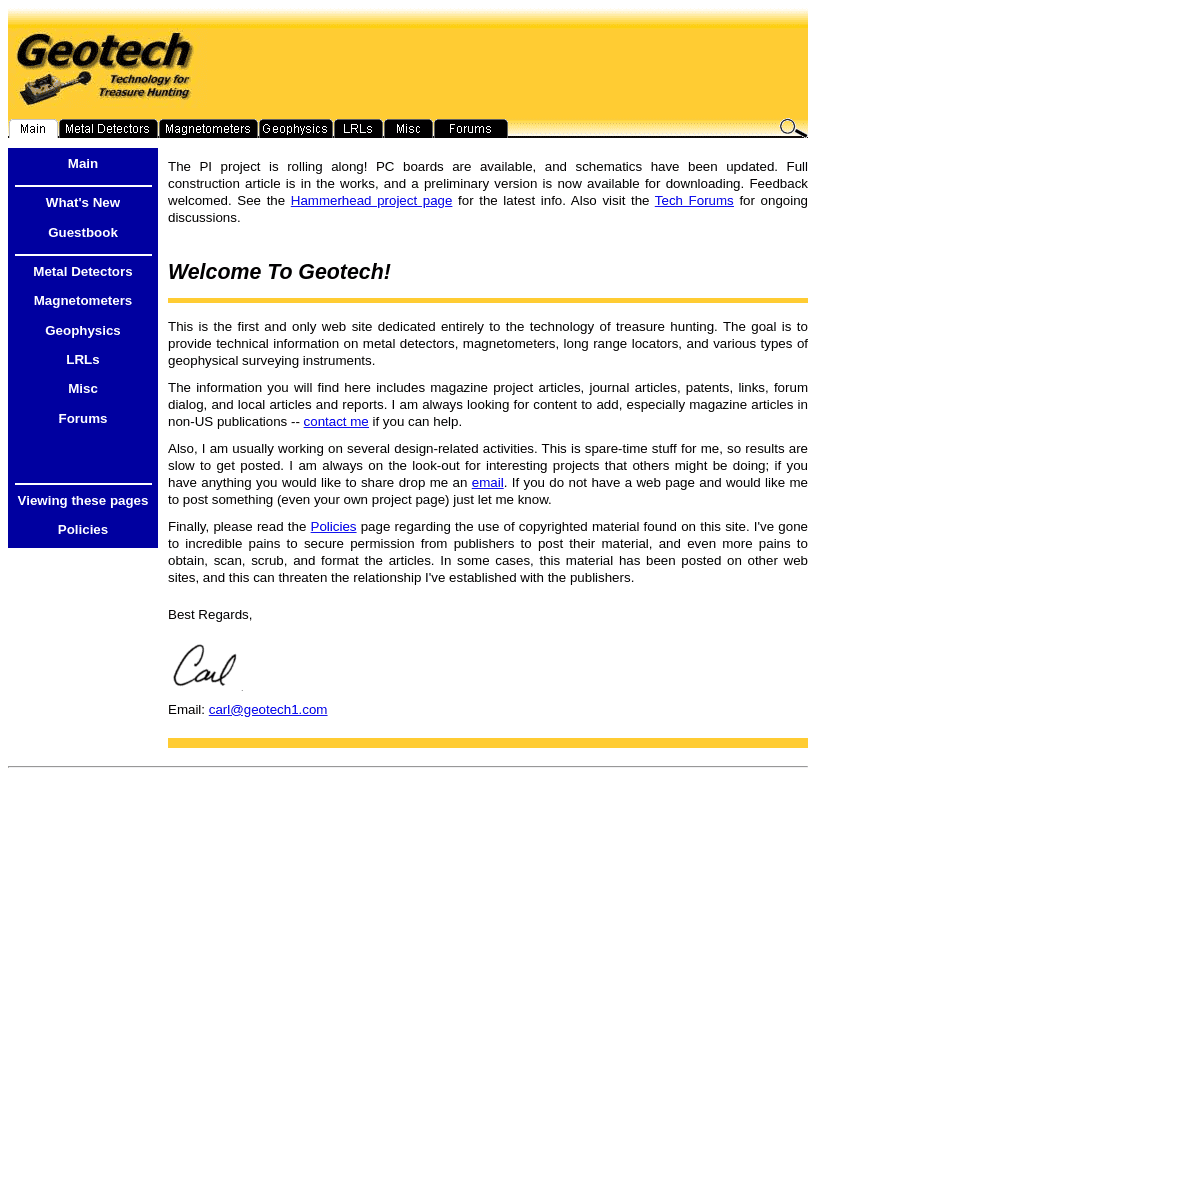 A complete backup of geotech1.com